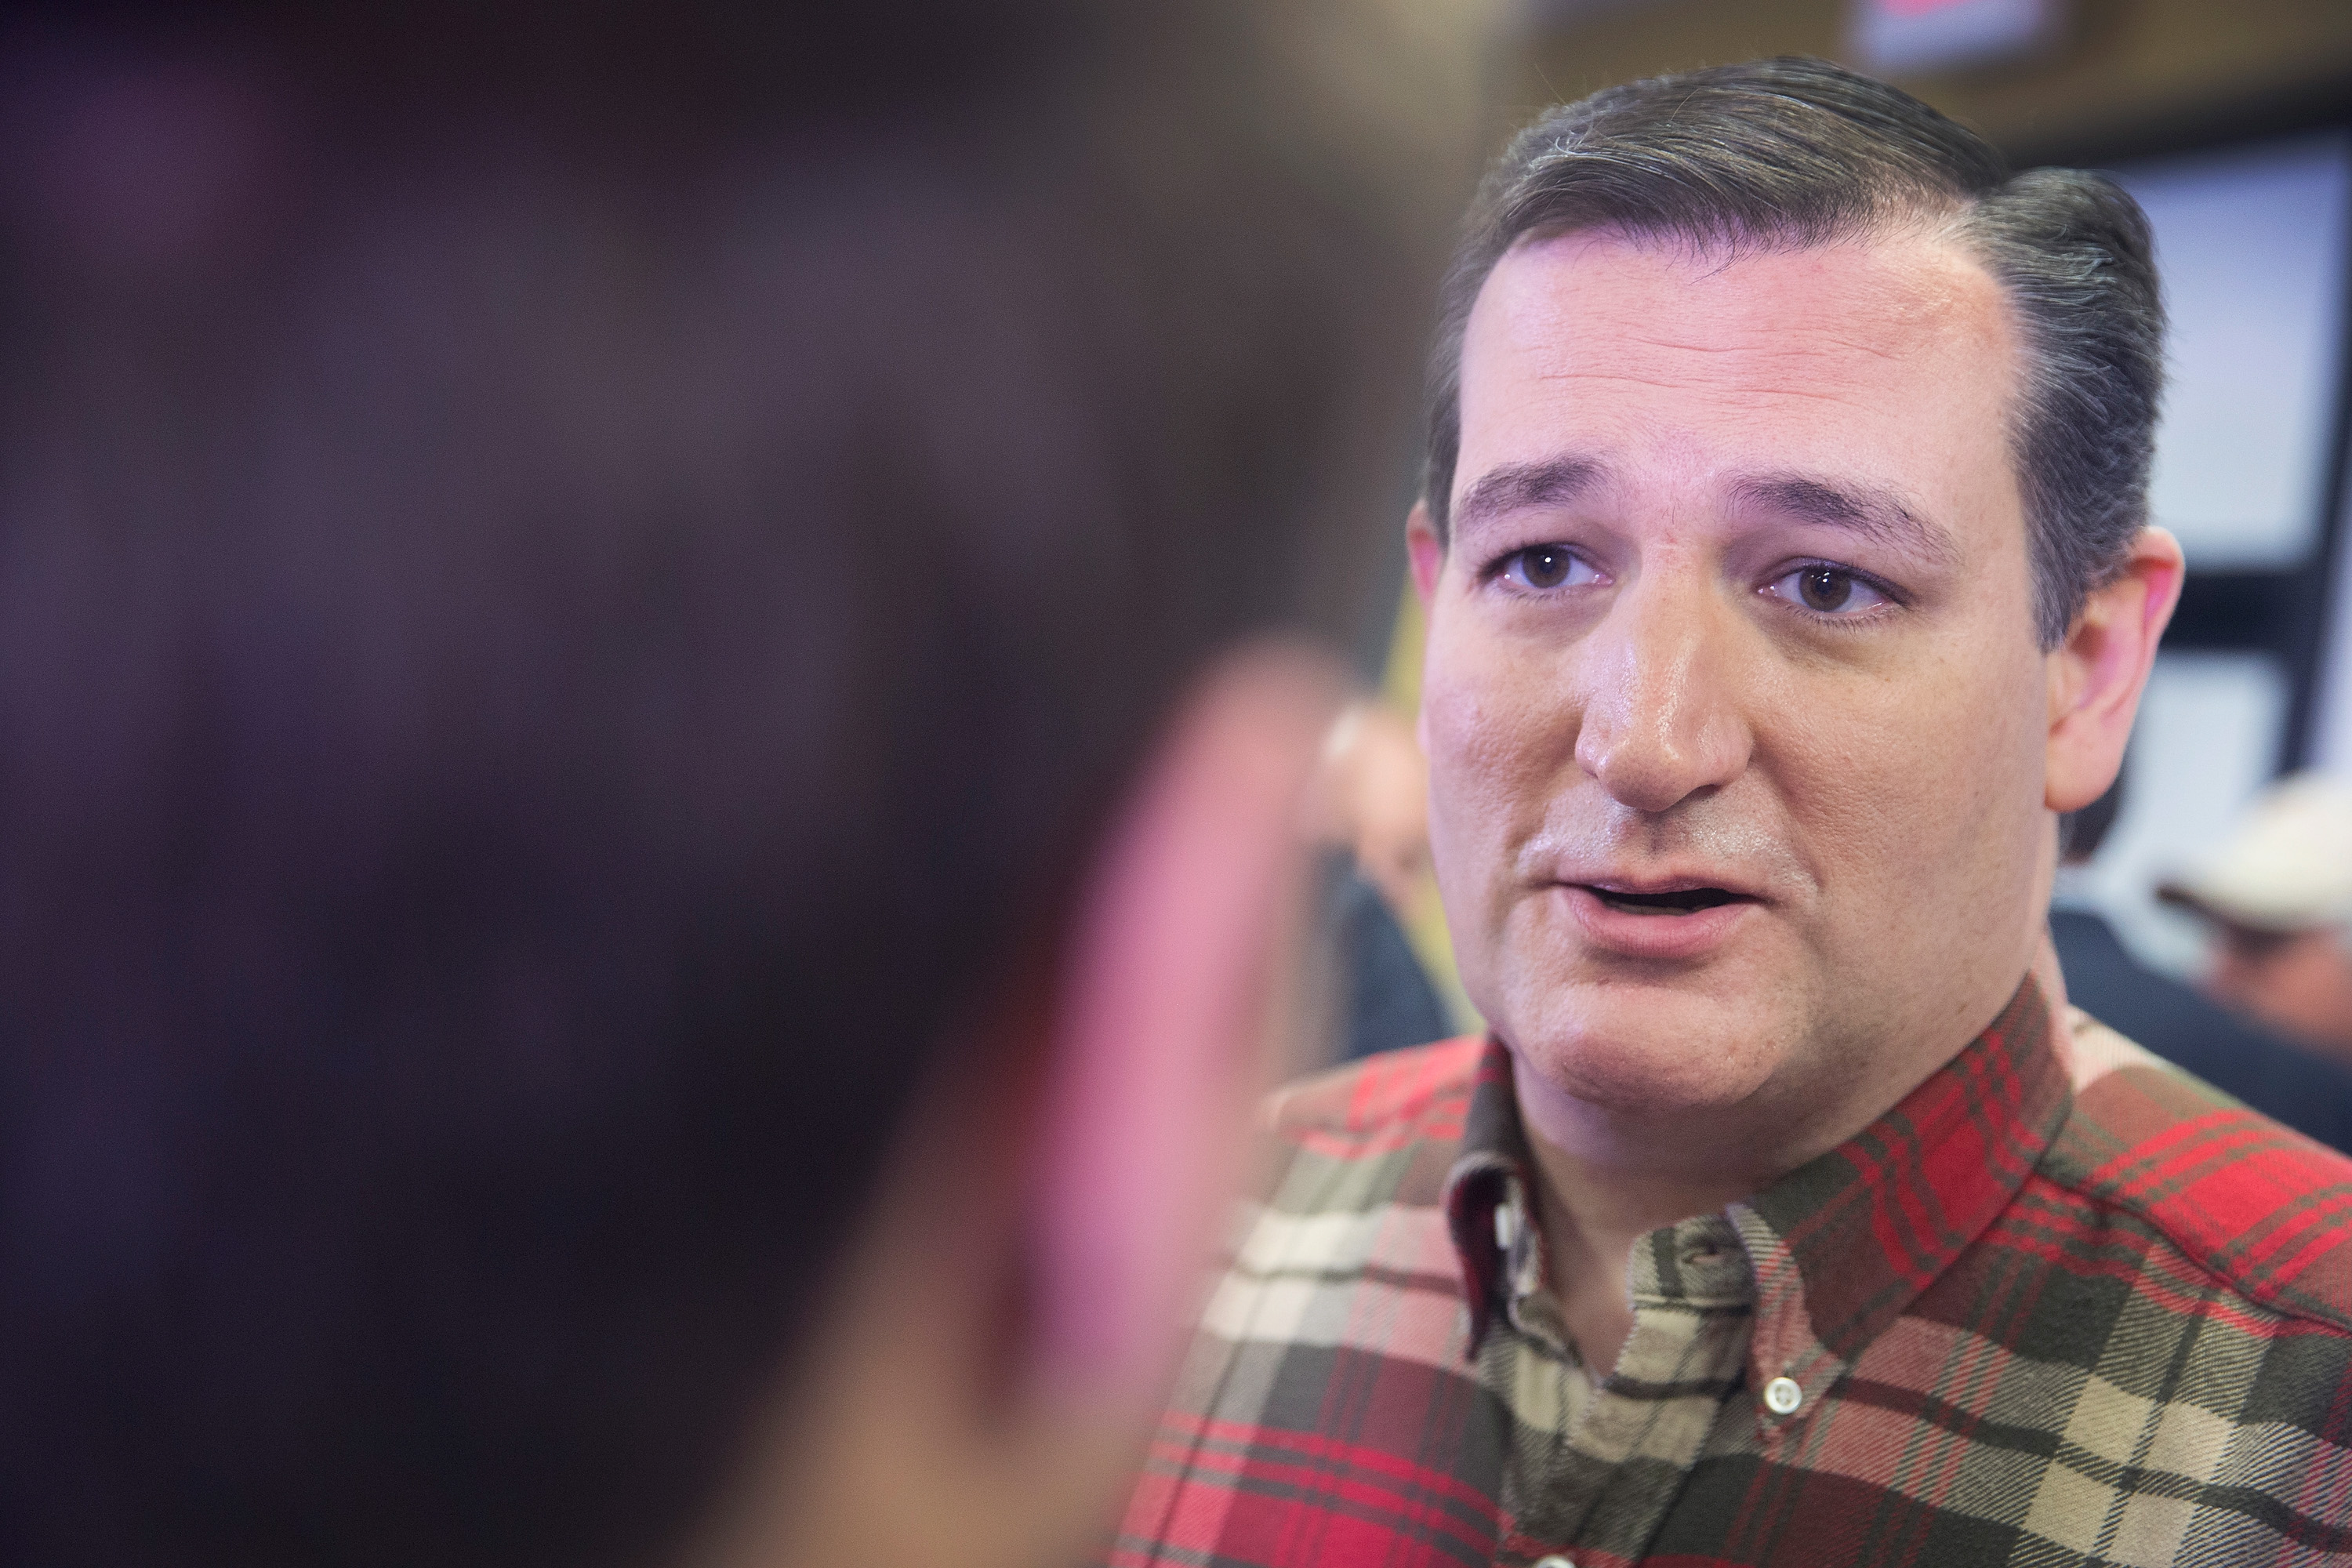 Ted Cruz has a campaign team that targets very specific groups.